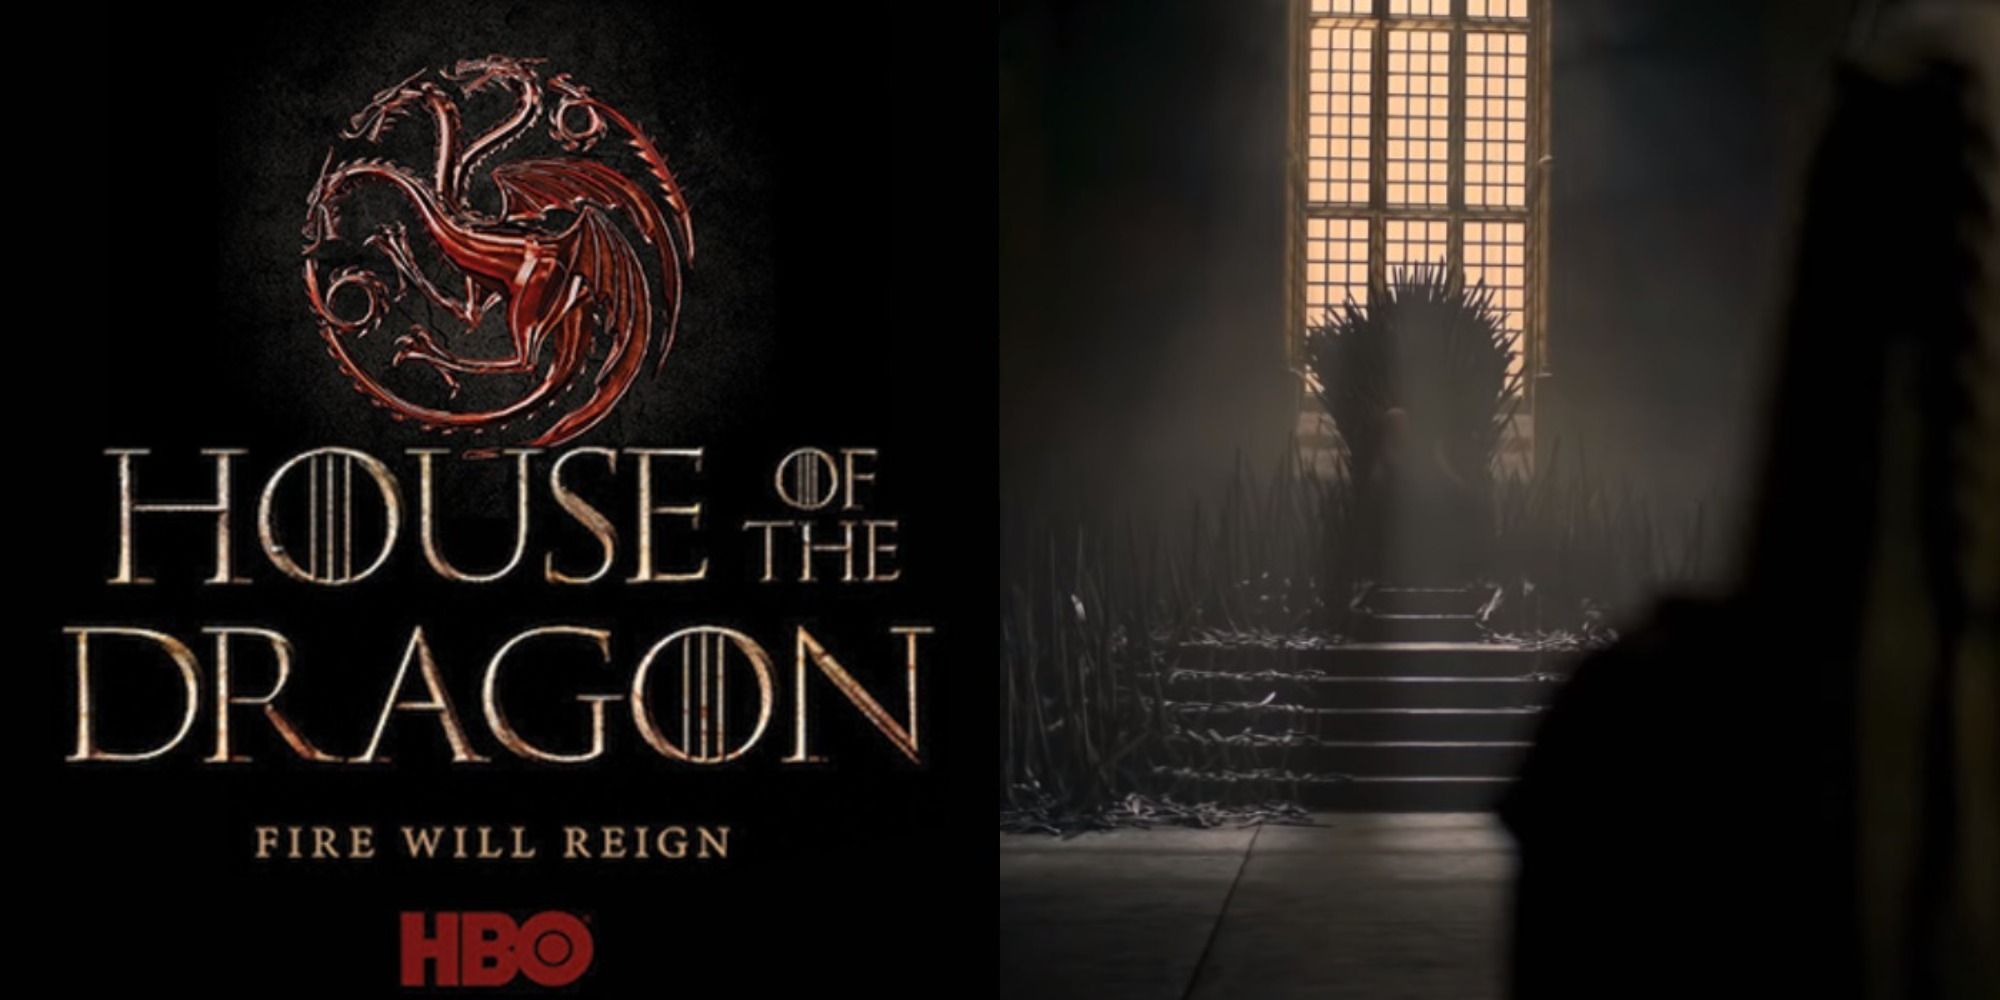 Split image of the House of the Dragon logo and the Iron Throne